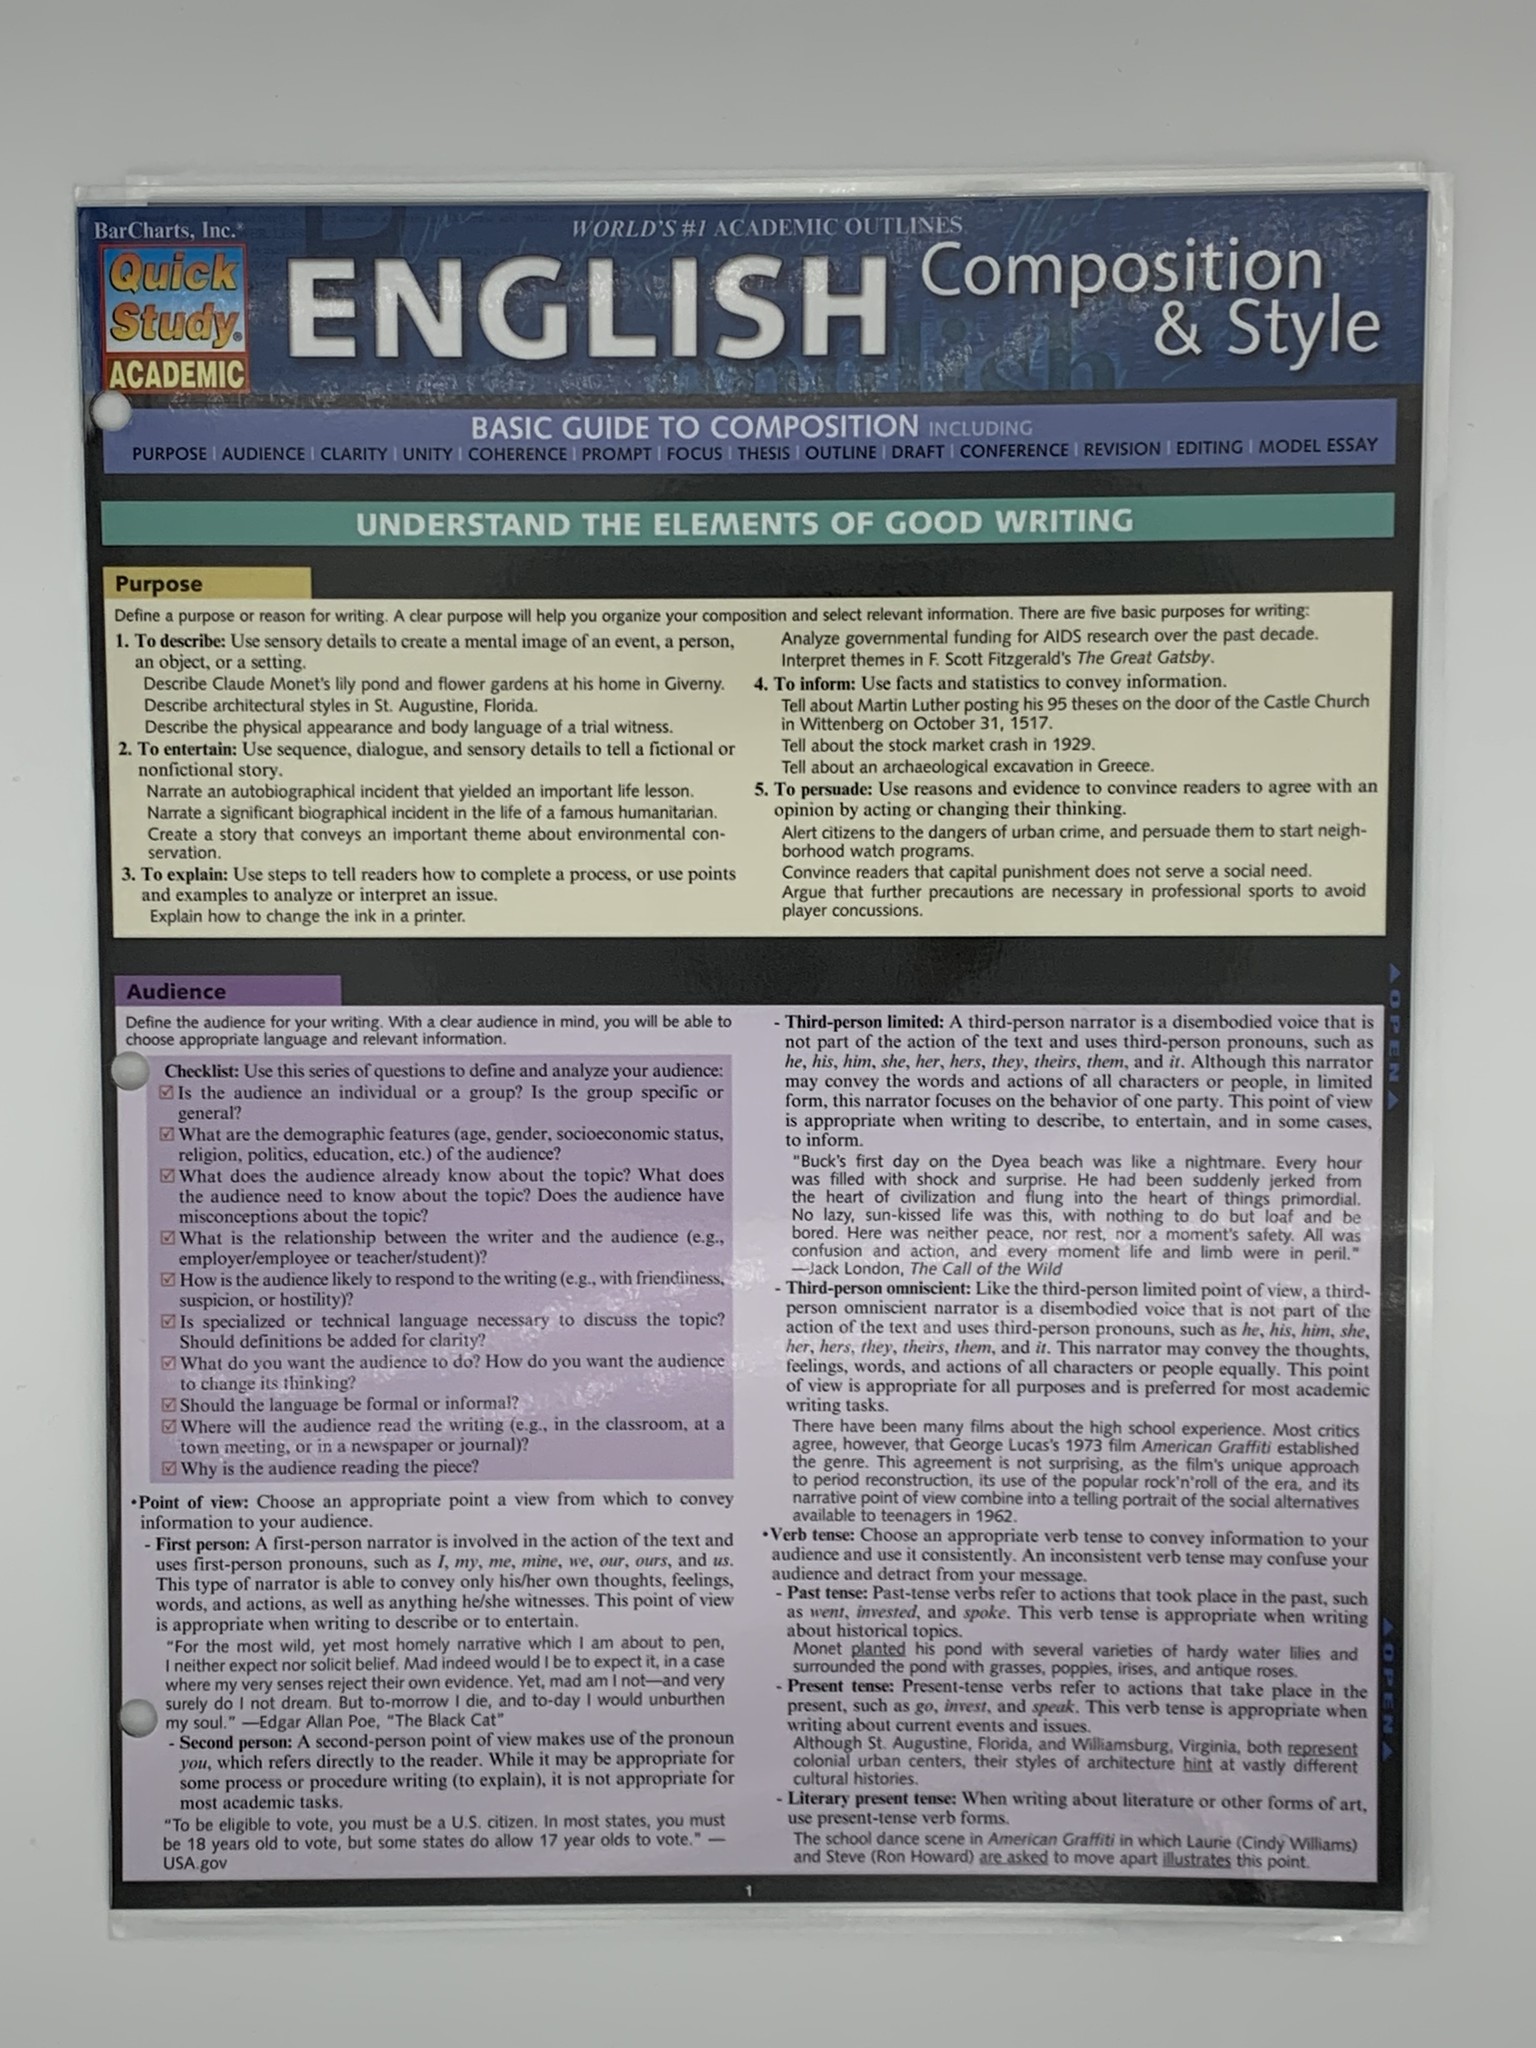 English Composition & Style - St. Mary's University